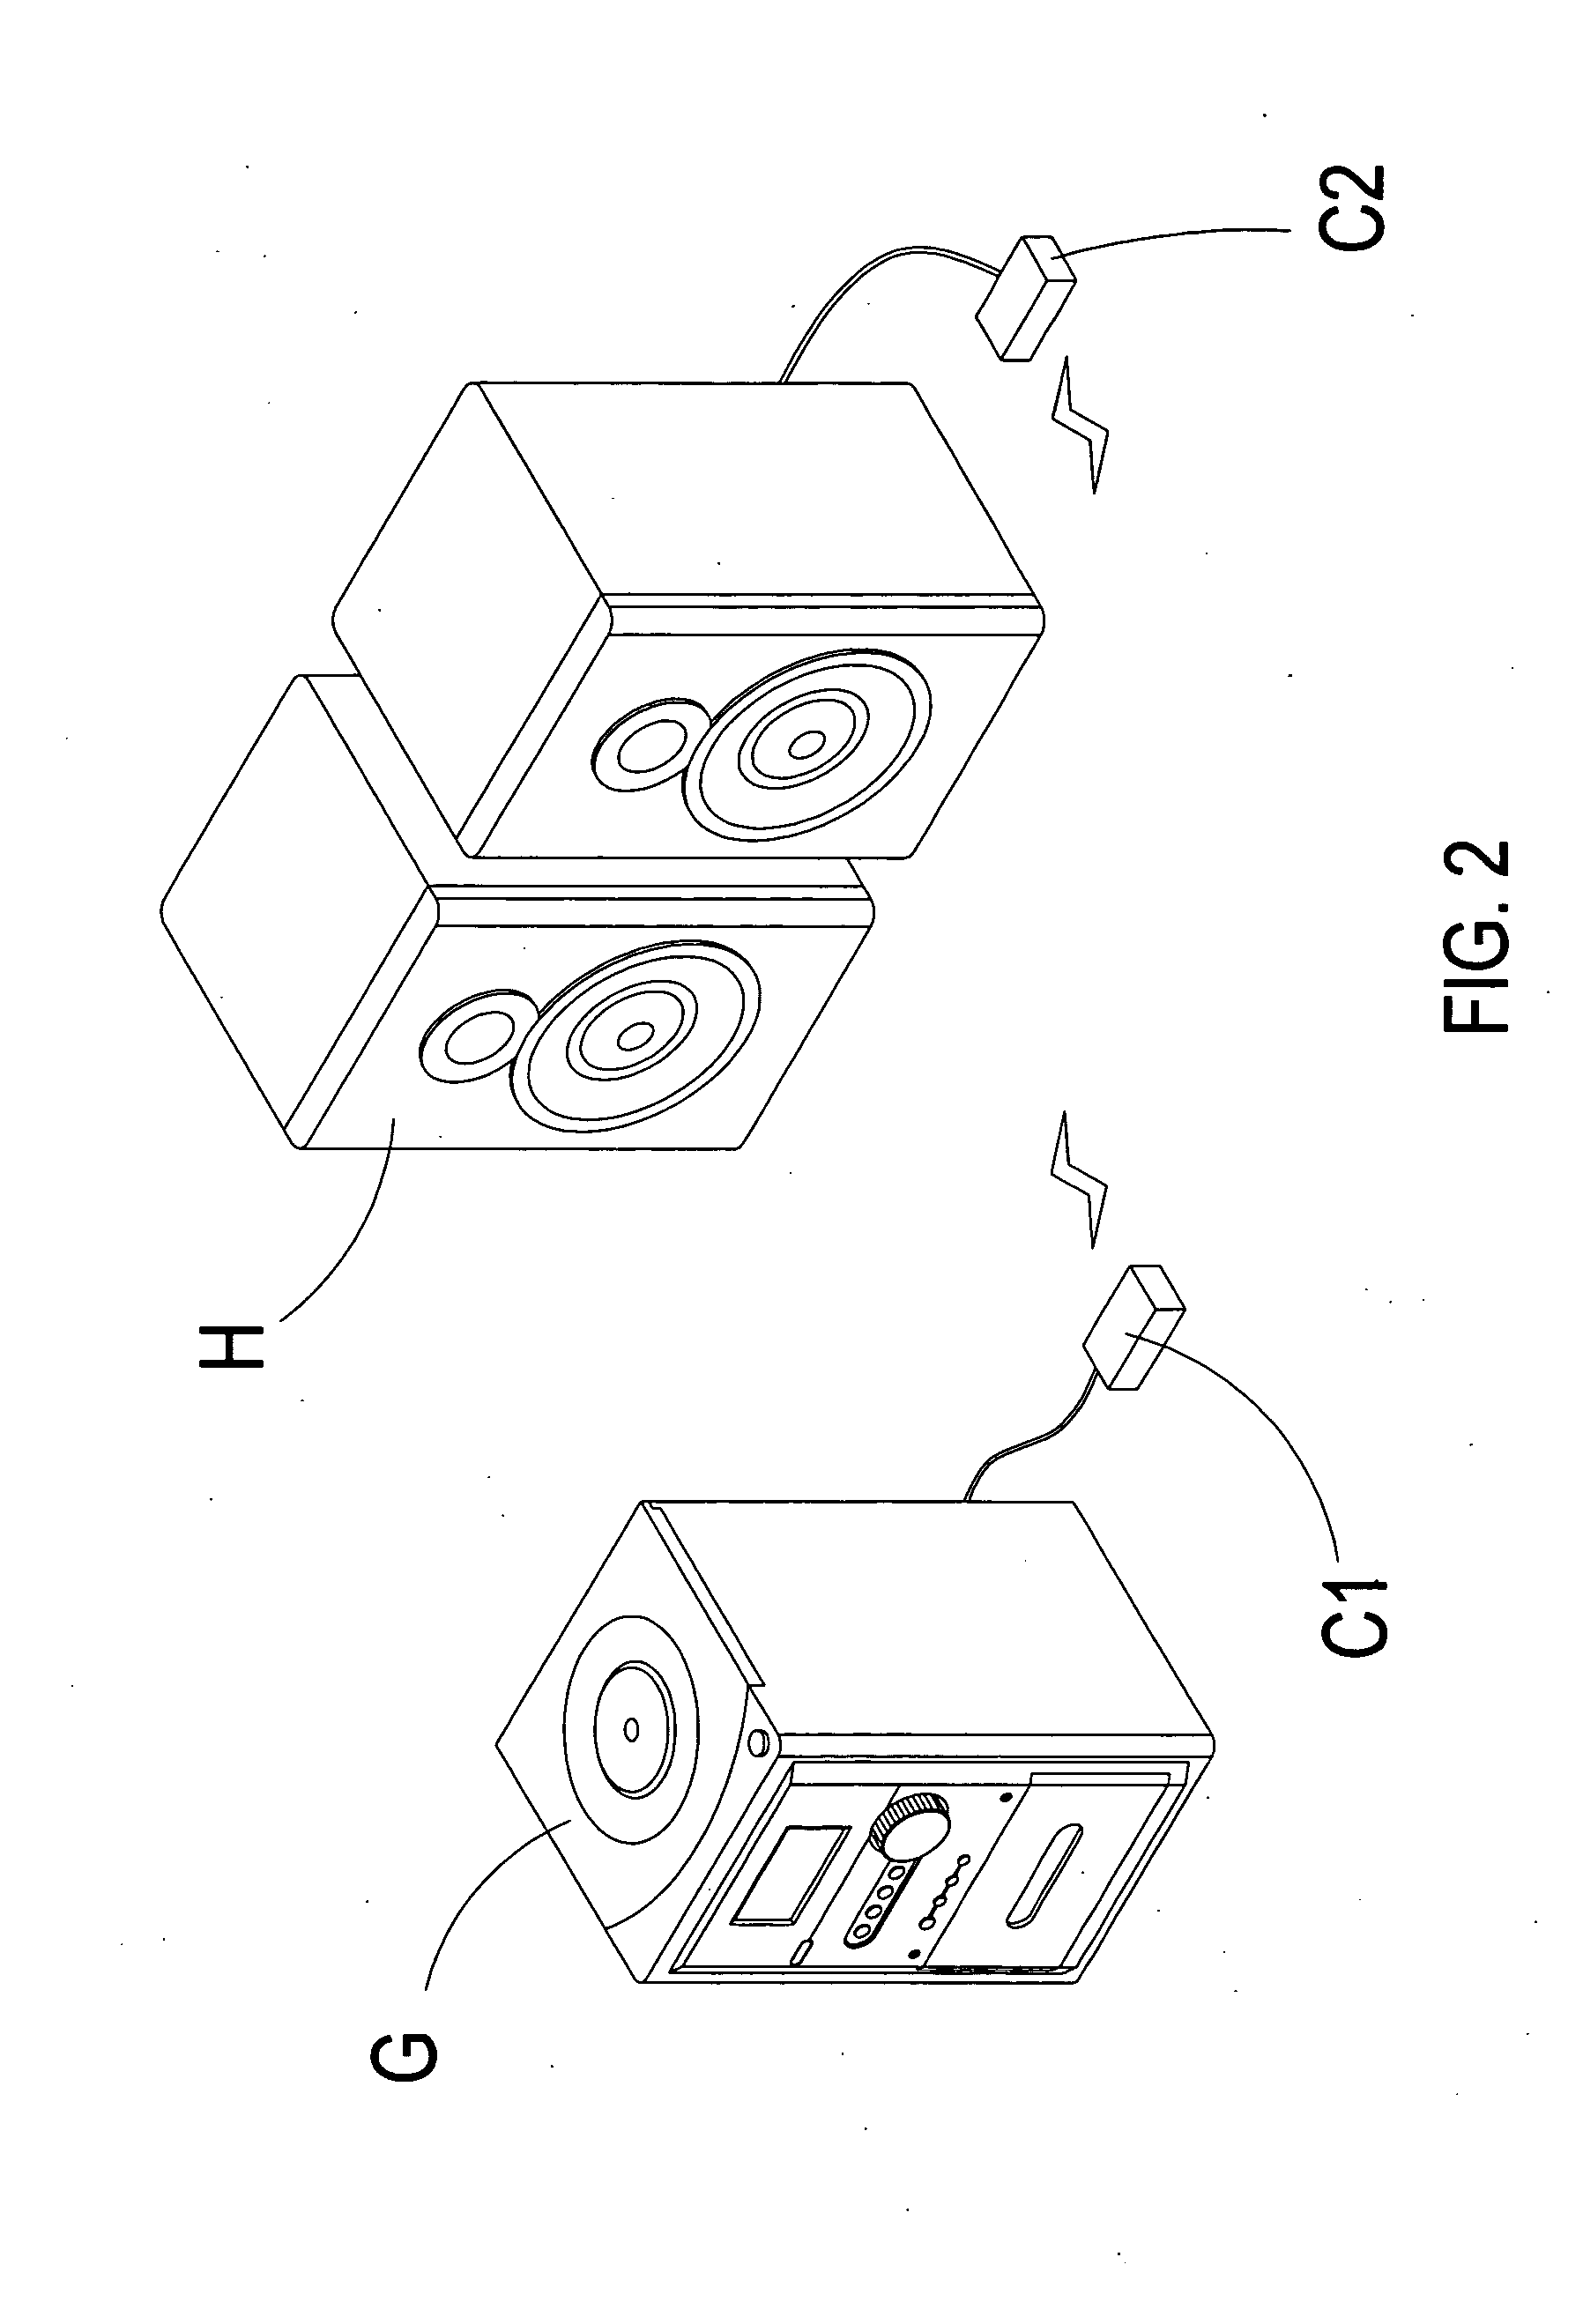 Assembly device which controls transmission of data signals with or without using wires